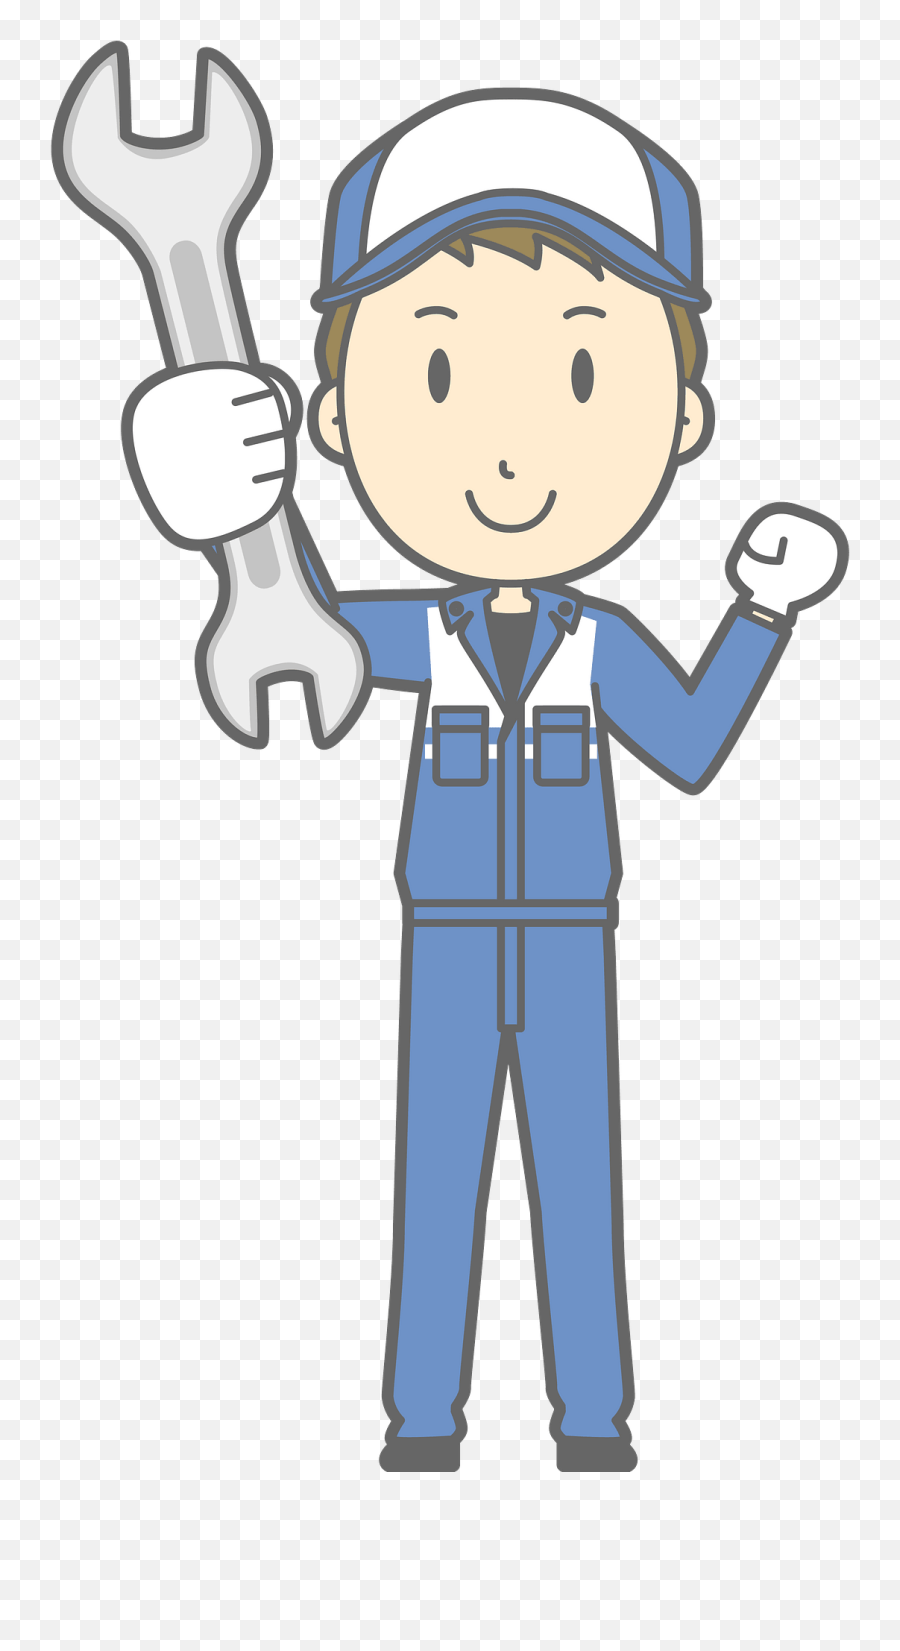 Todd Mechanic Man Is Holding A Wrench Clipart Free - Workwear Emoji,Mechanic Clipart